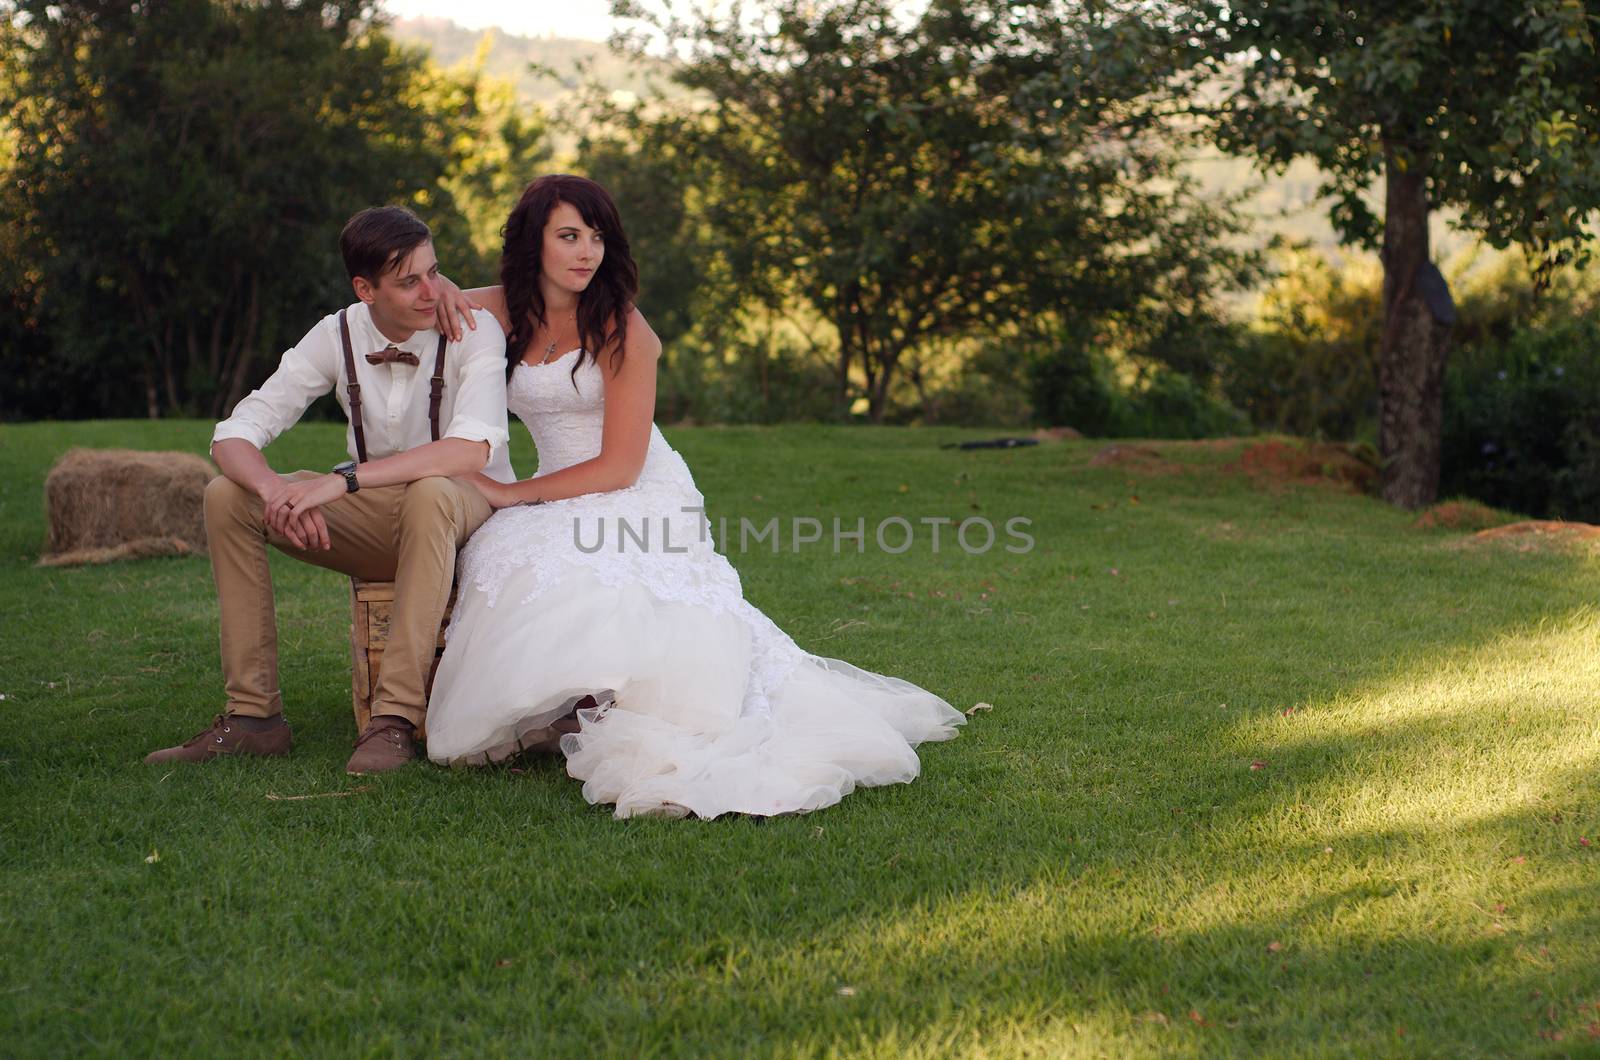 Bride and groom in garden wedding by alistaircotton